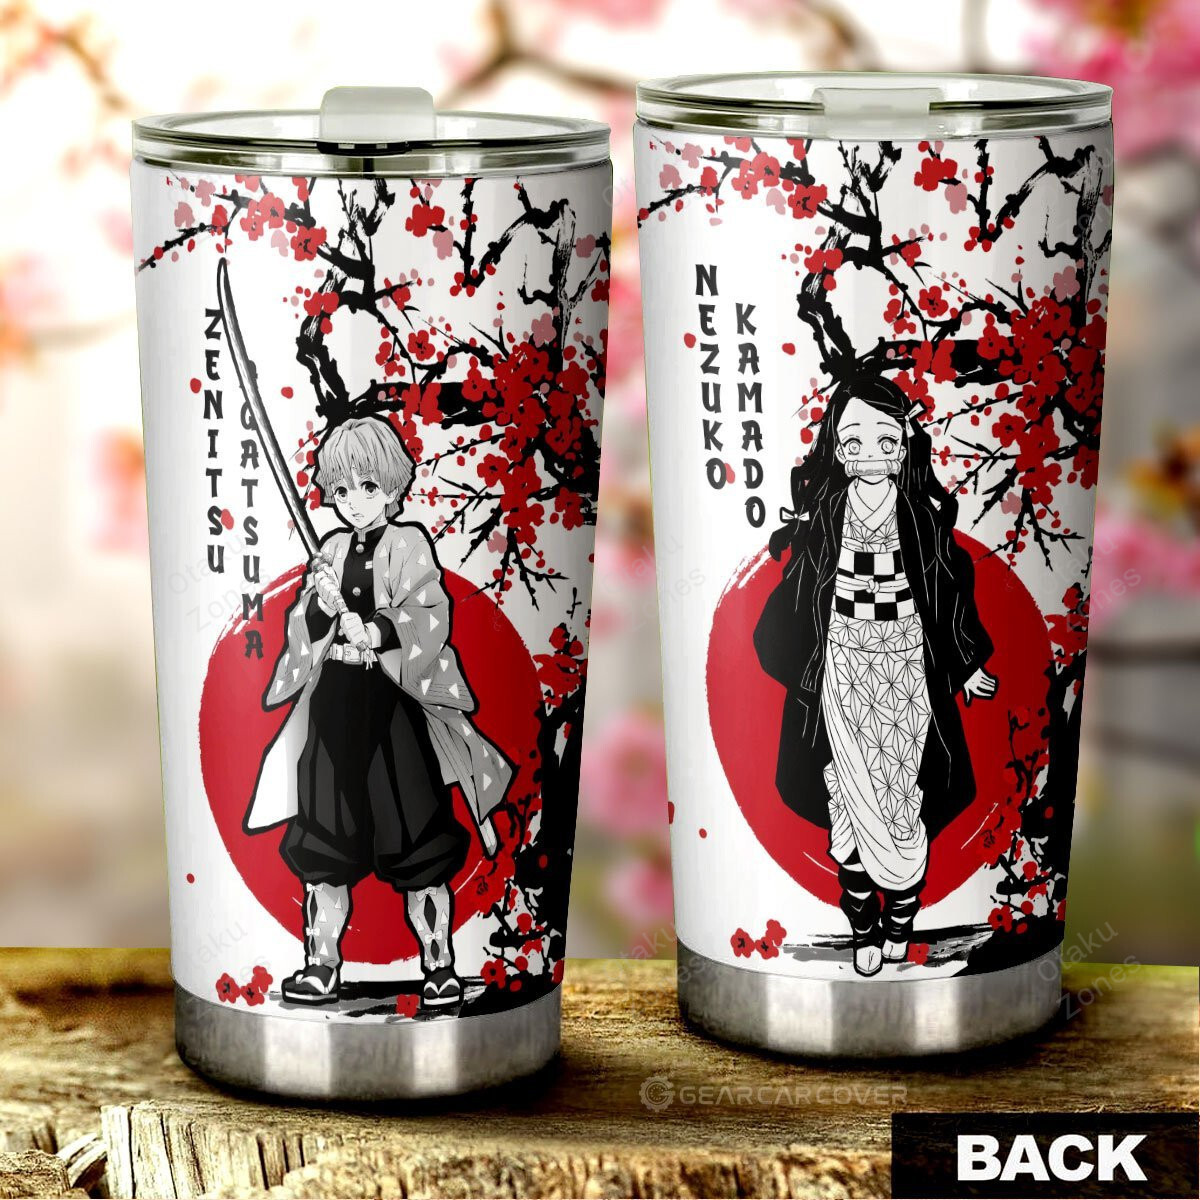 Show Off Your Favorite Anime Character In Style With These Products Word1